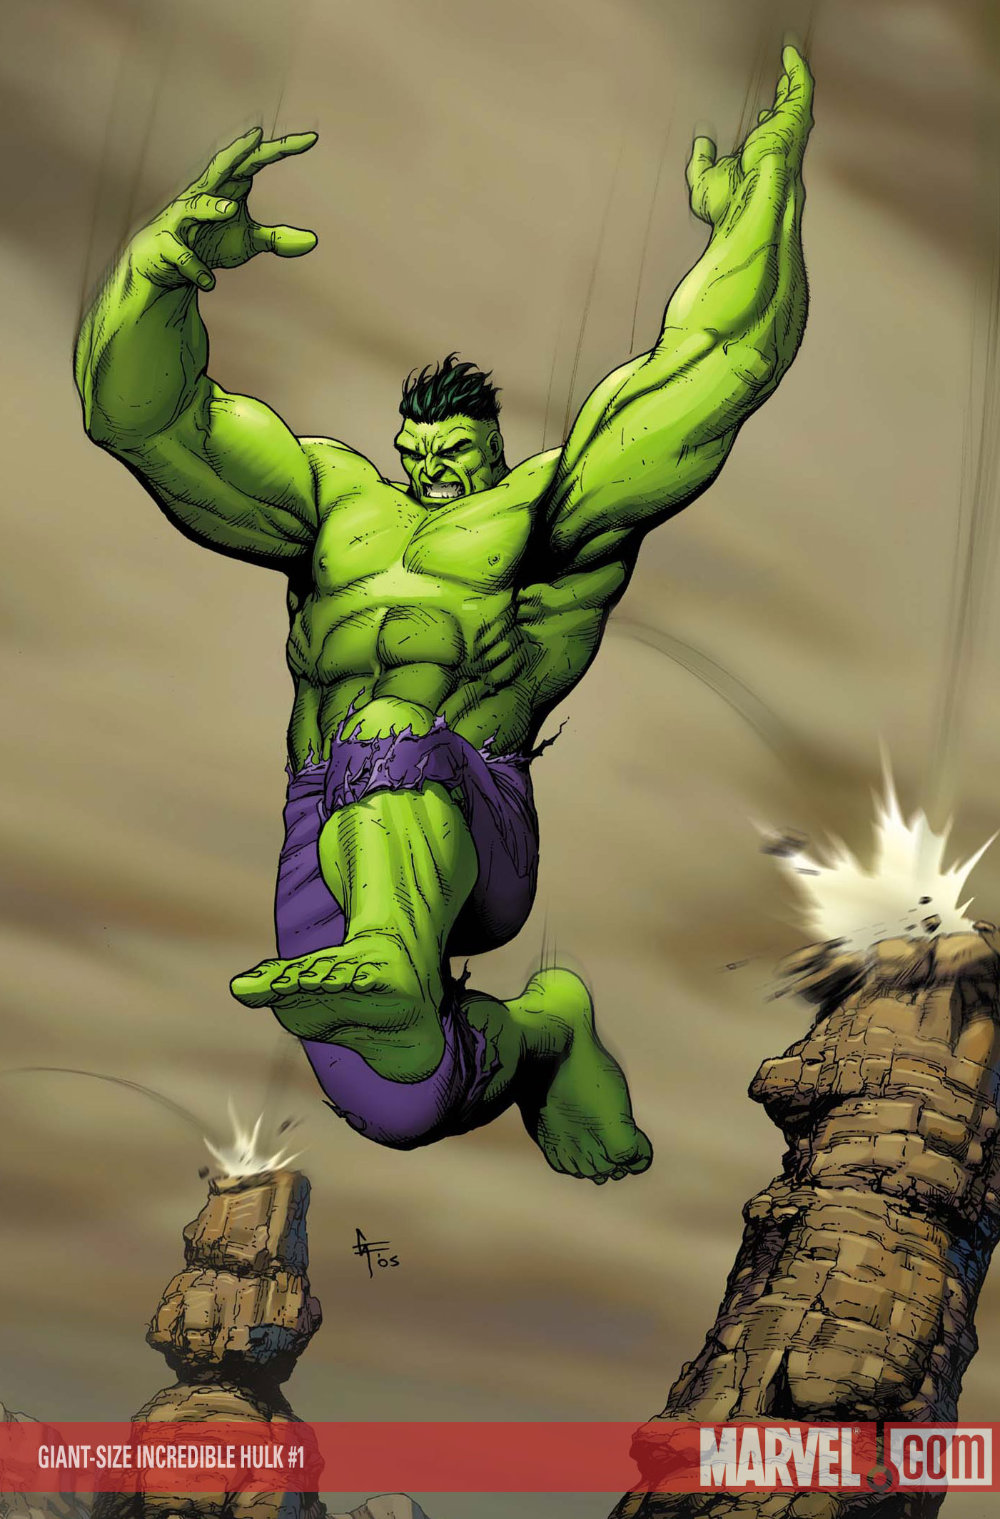 Hulk Unleashed - [Event RP Anniversaire] War of the Gods - Hulk Unleashed - Page 2 Gary-Frank-Giant-Size-Incredible-Hulk-cover